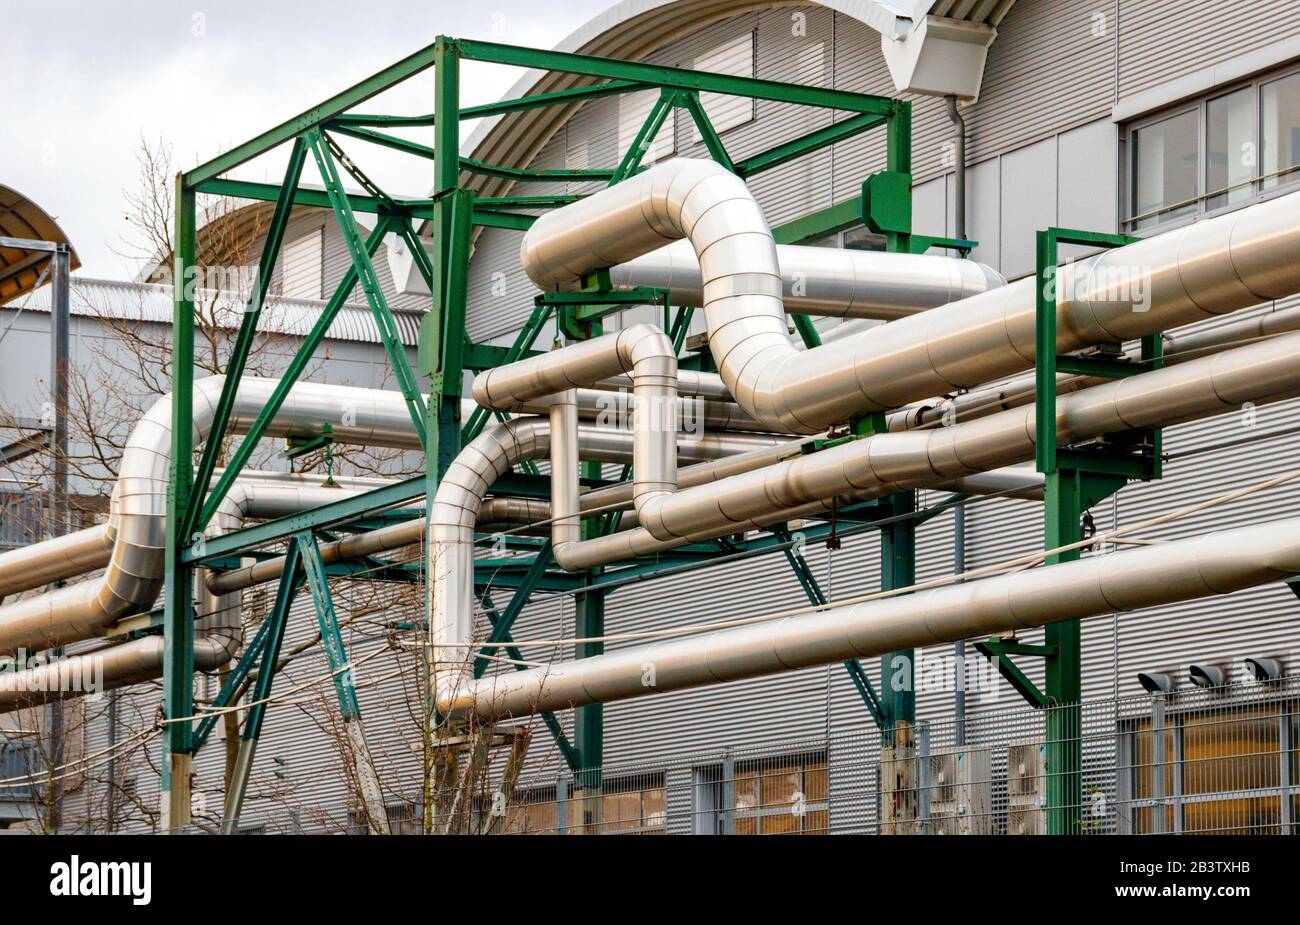 Complex pipeline of a power plant. Multiple aluminium pipes entangled with each other and supported by a green metal frame. Stock Photo